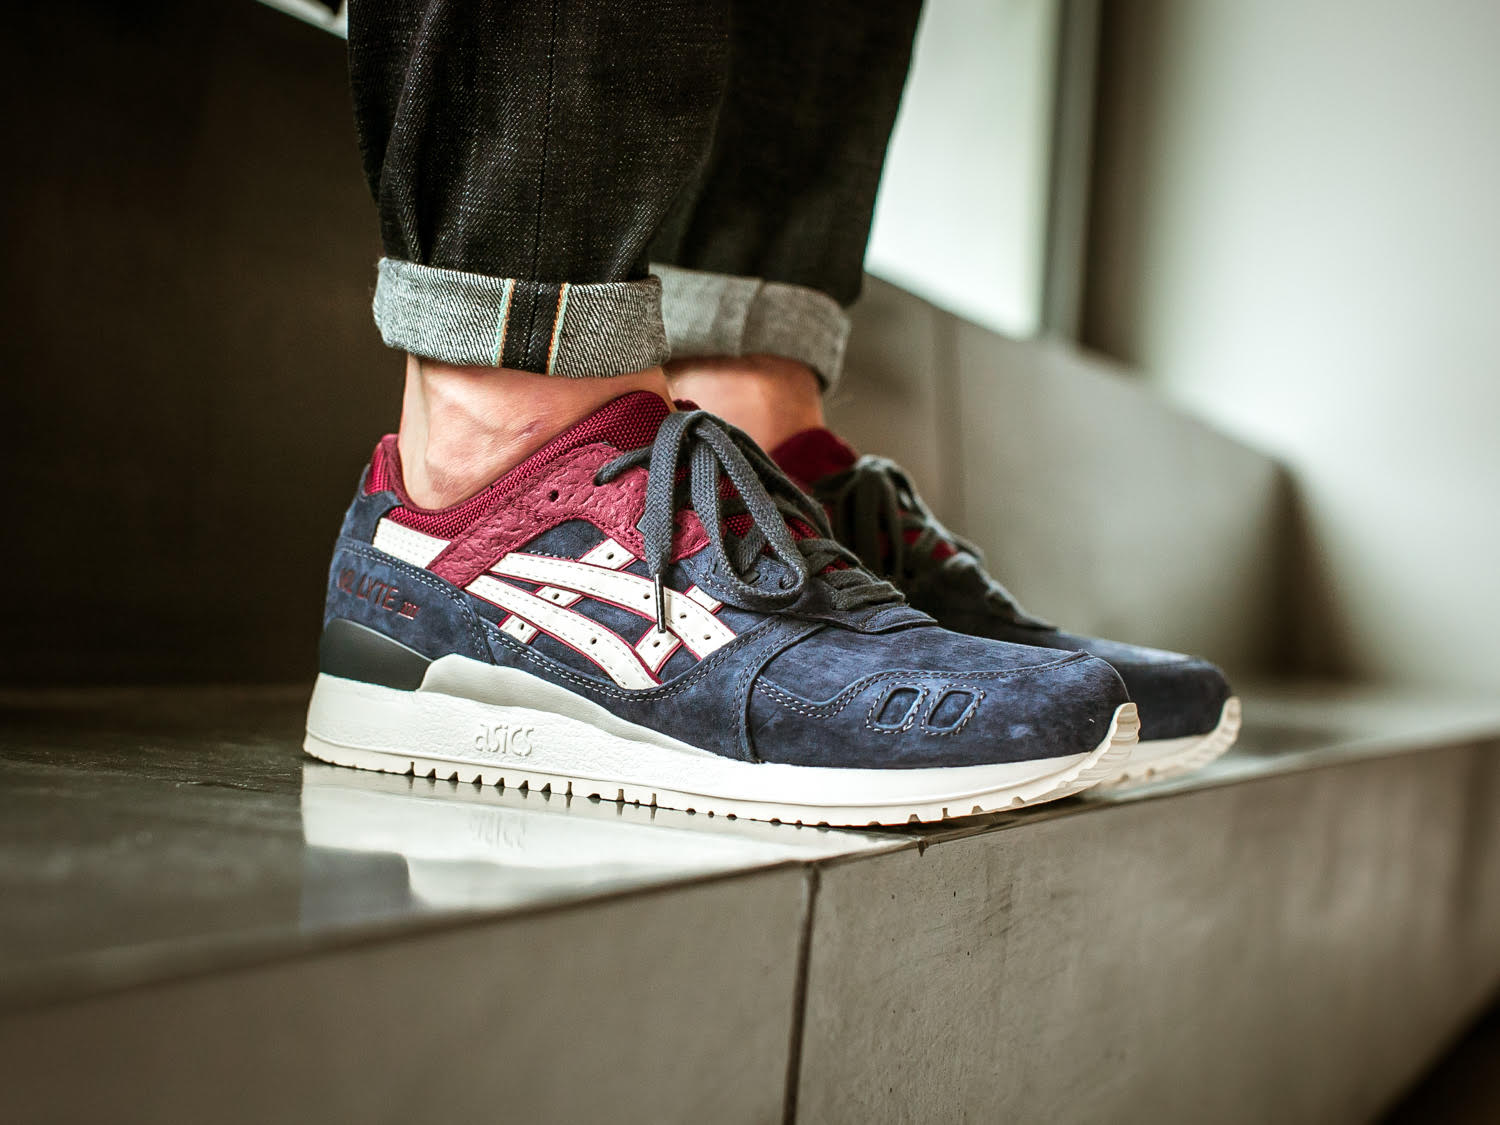 Asics Gel-Lyte III India Ink Right